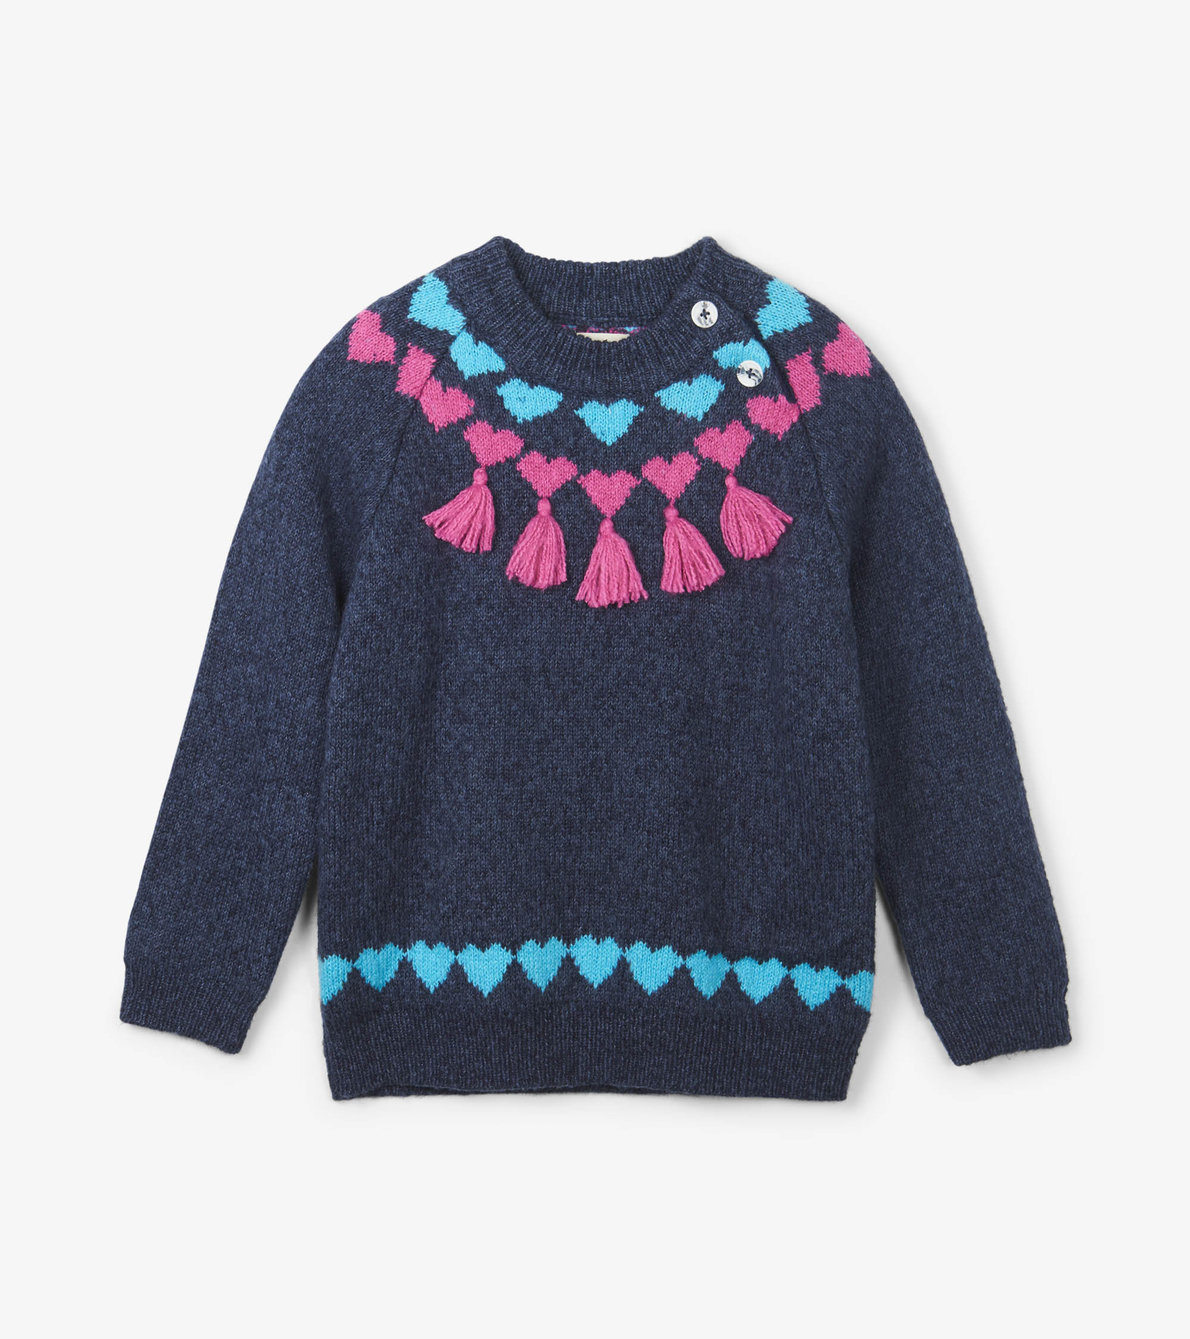 View larger image of Pretty Winter Knit Sweater